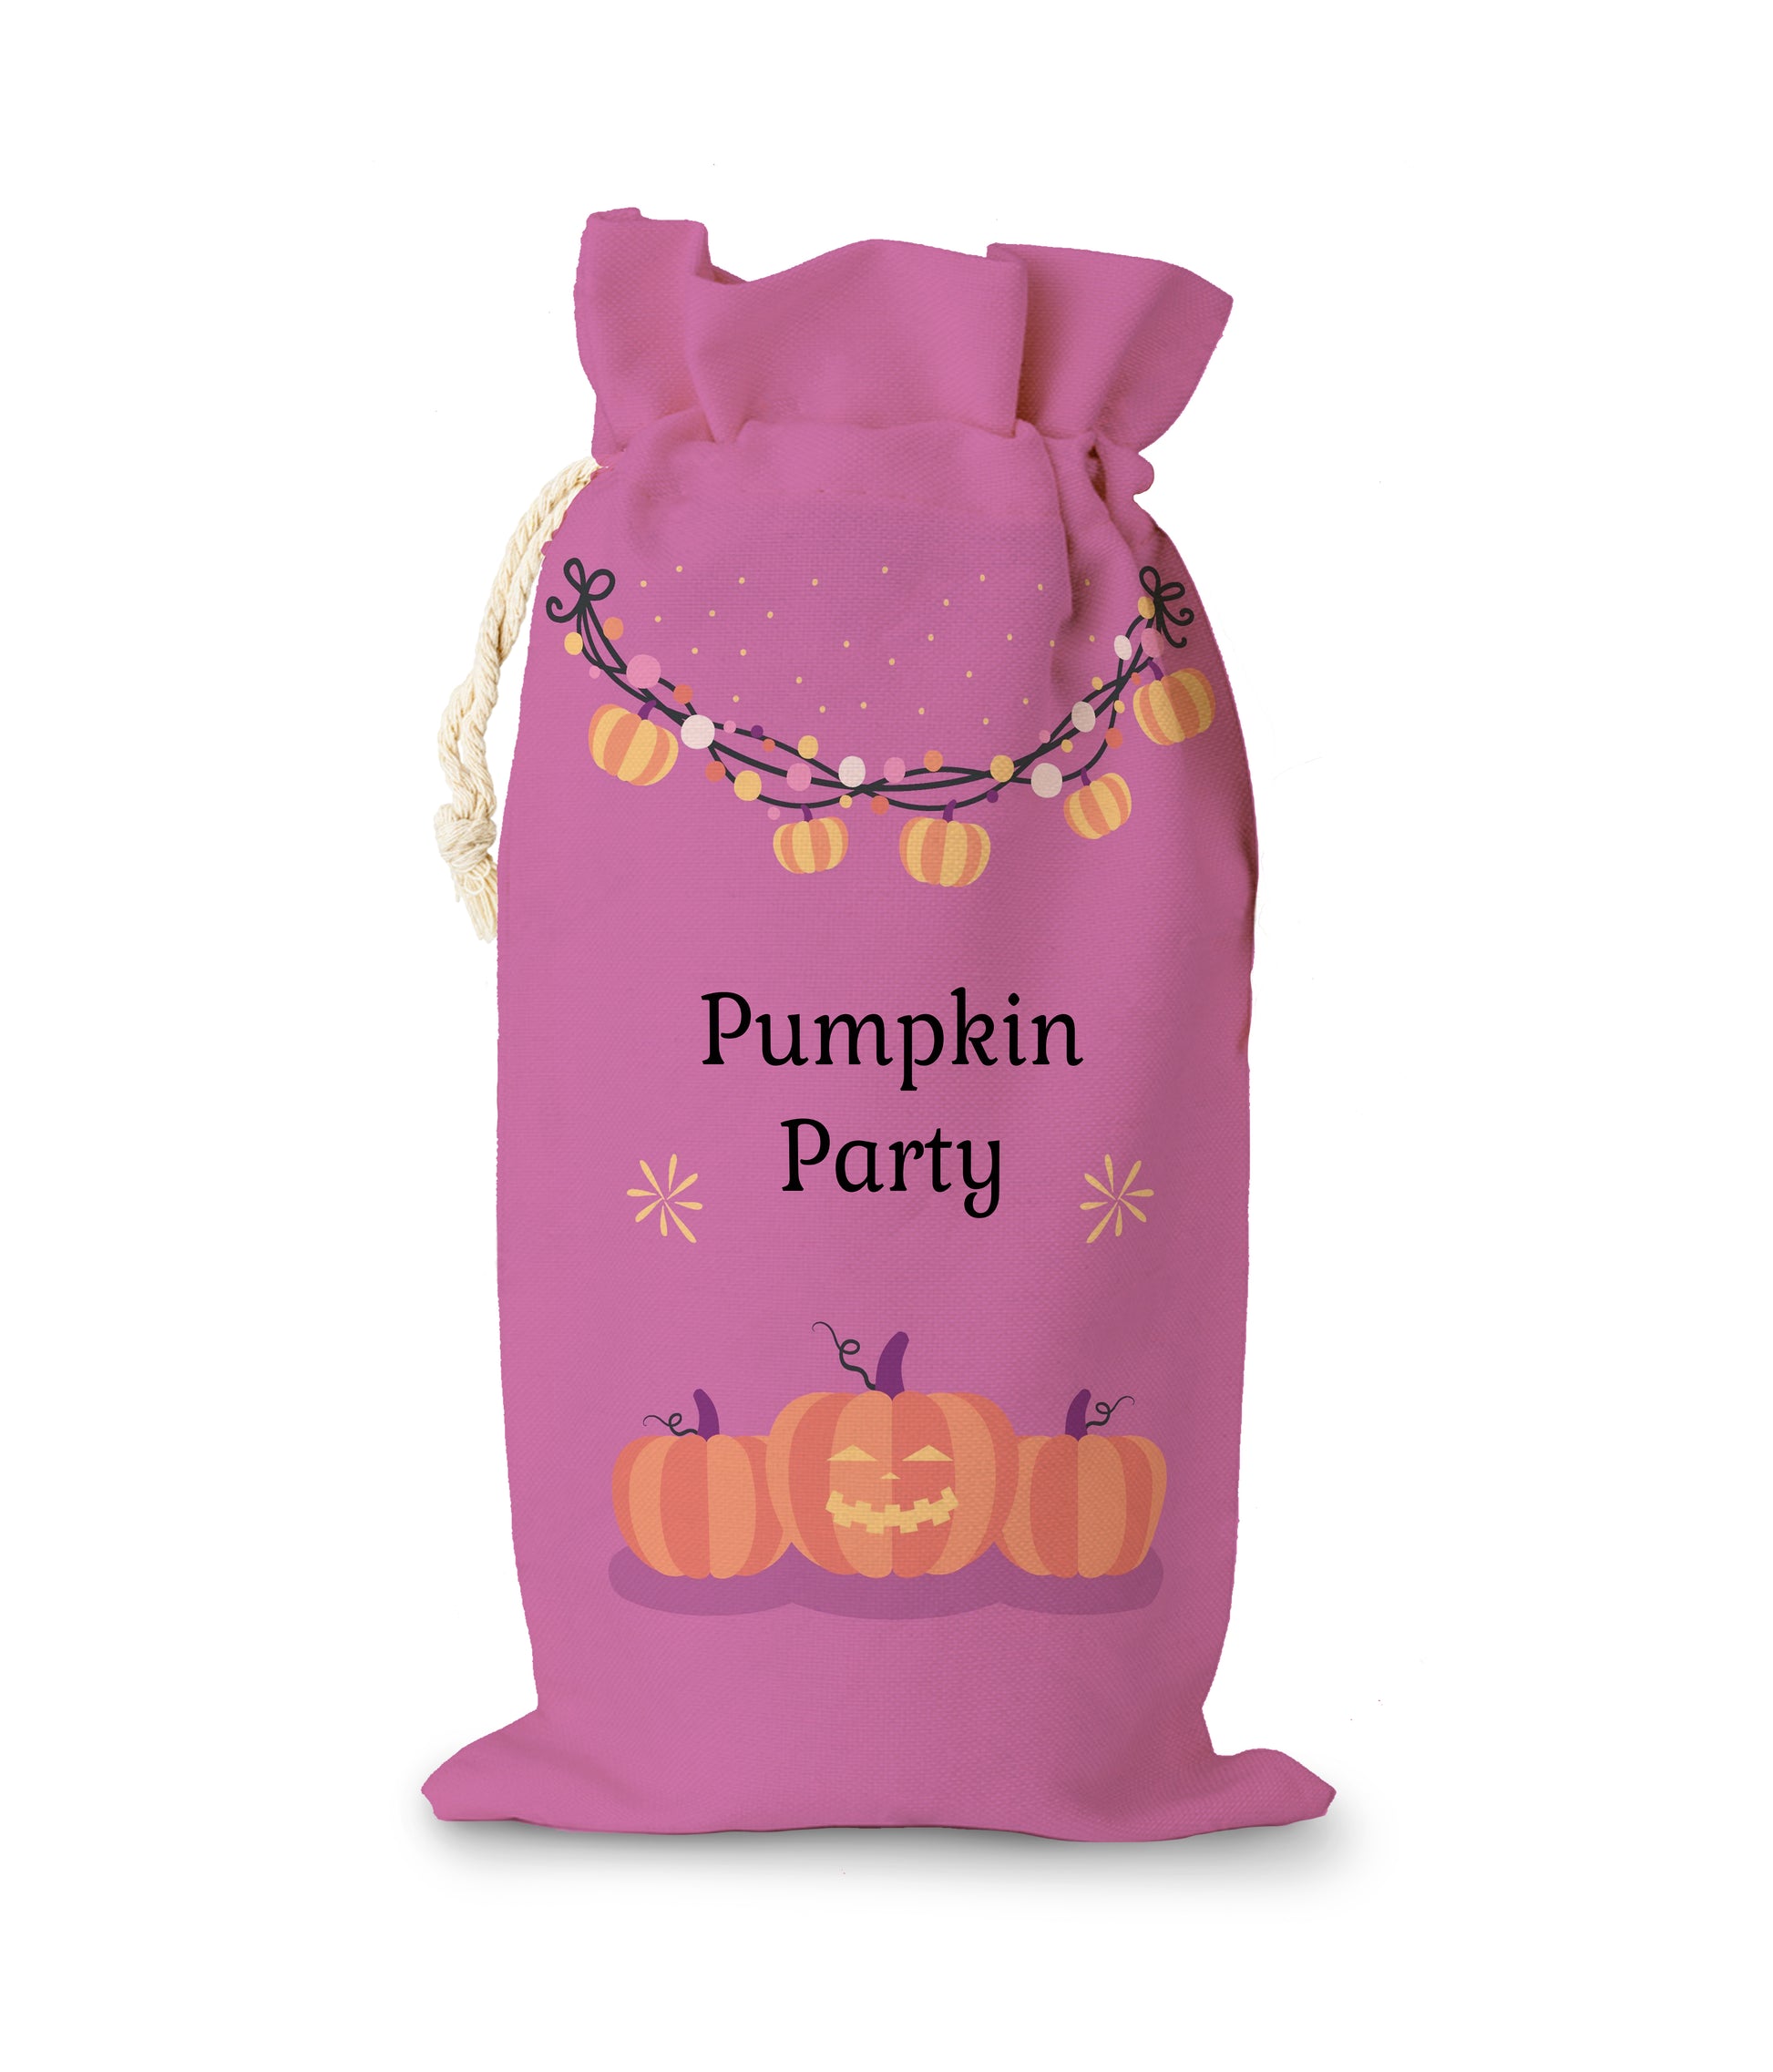 Halloween Sack with Text "Pumpkin Party"